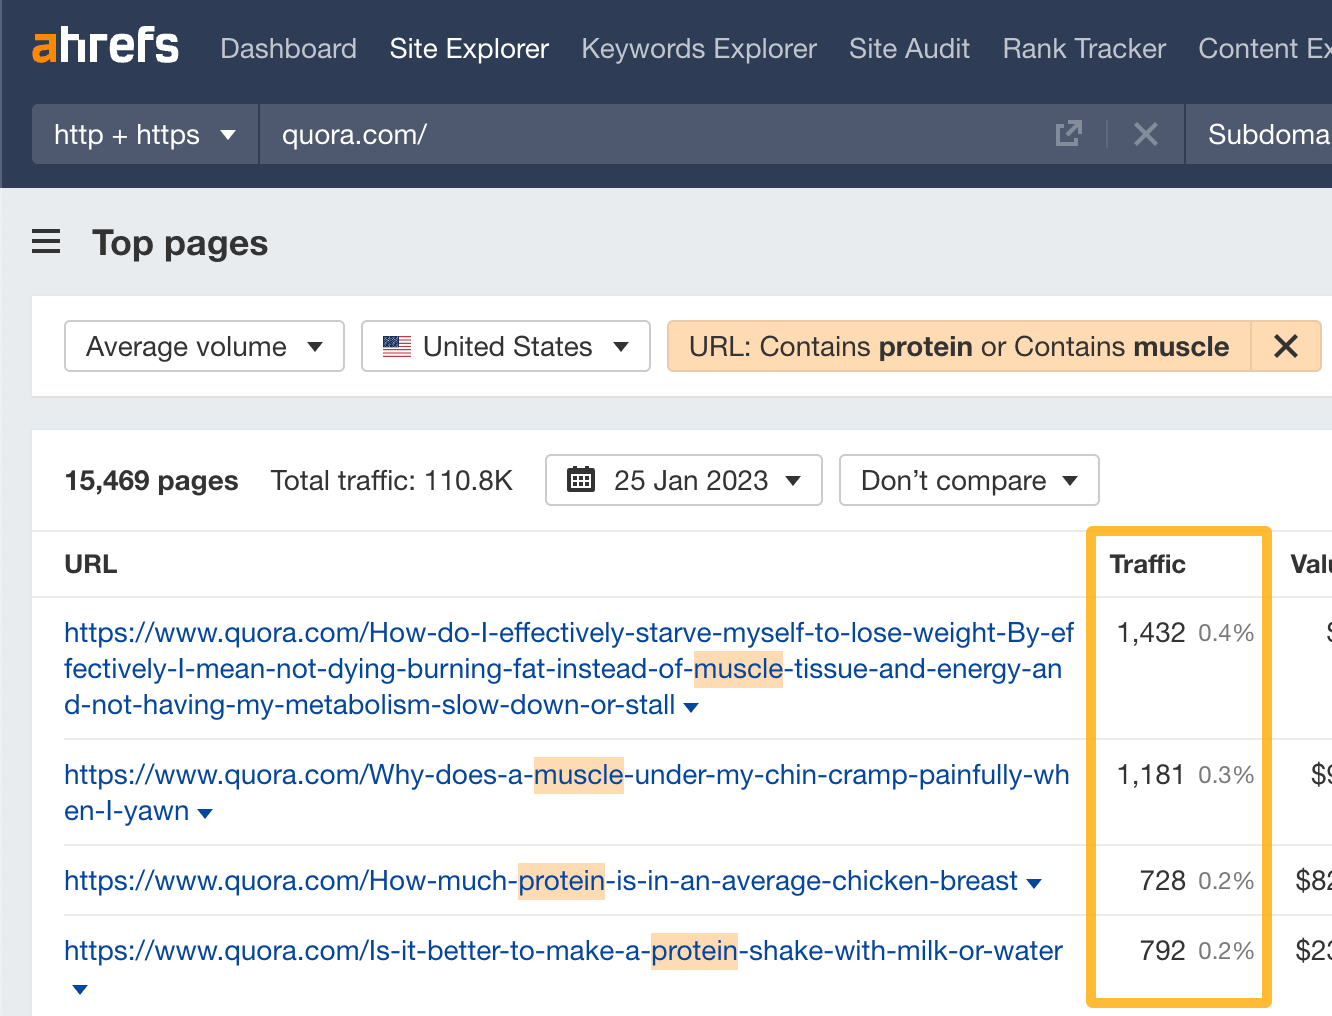 Sear،g for relevant Quora threads with traffic in Ahrefs' Site Explorer
